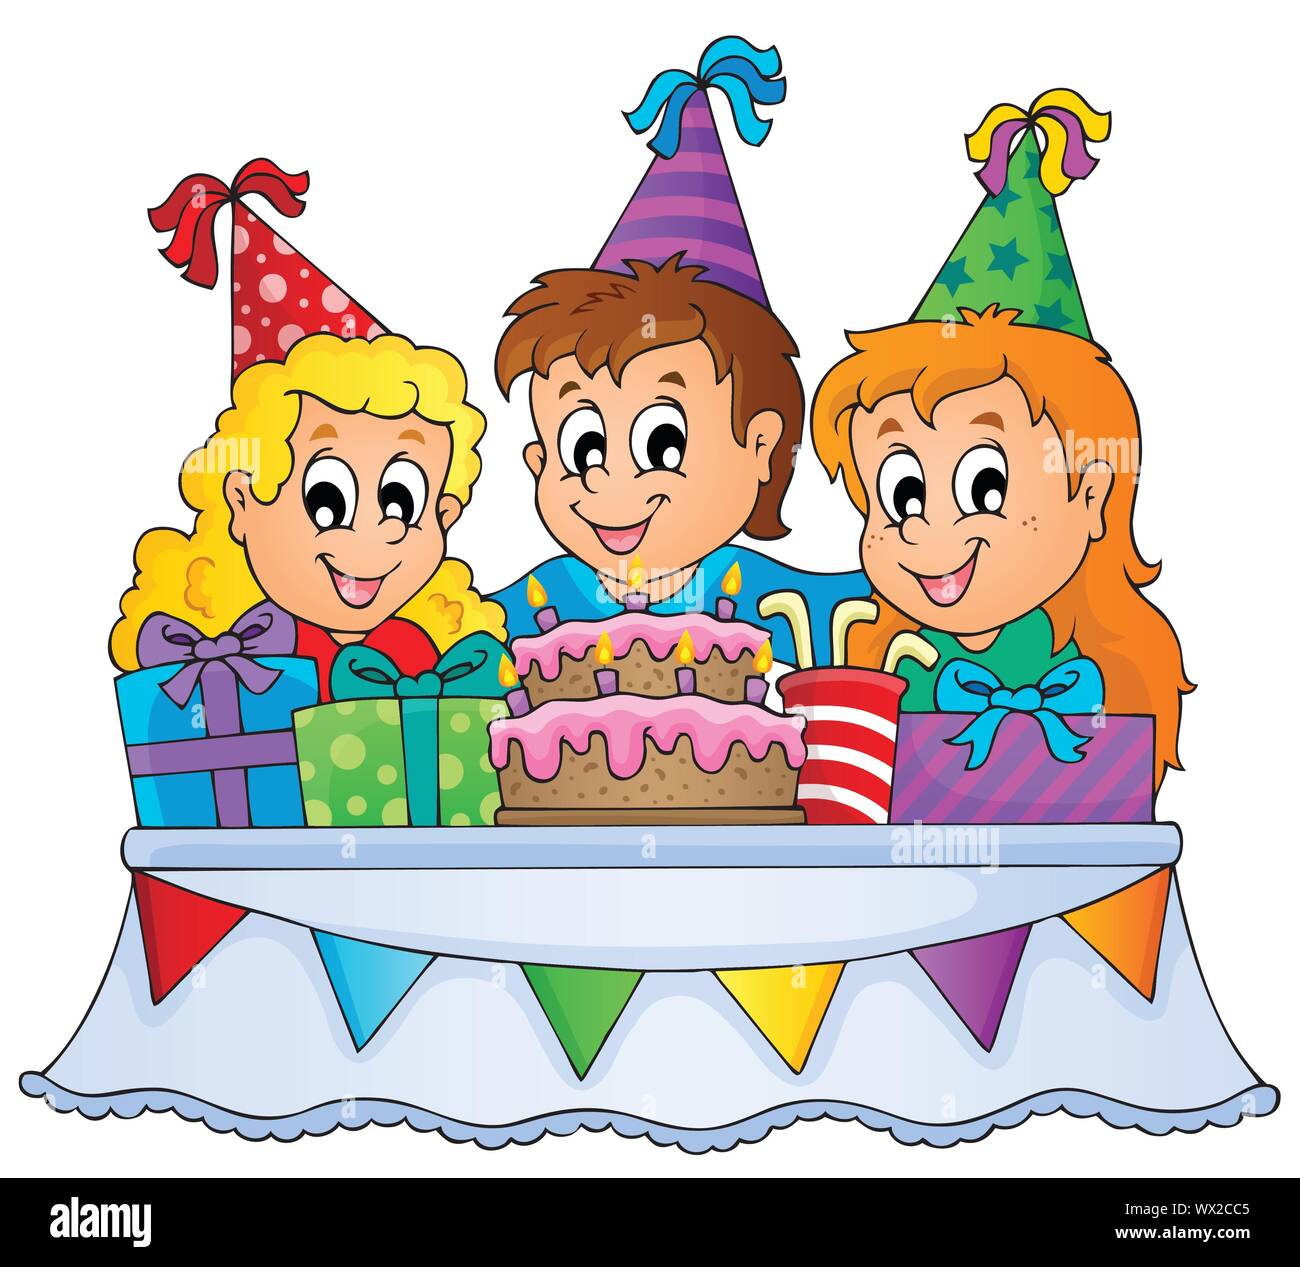 Birthday Kid Drawing Vectors from GraphicRiver